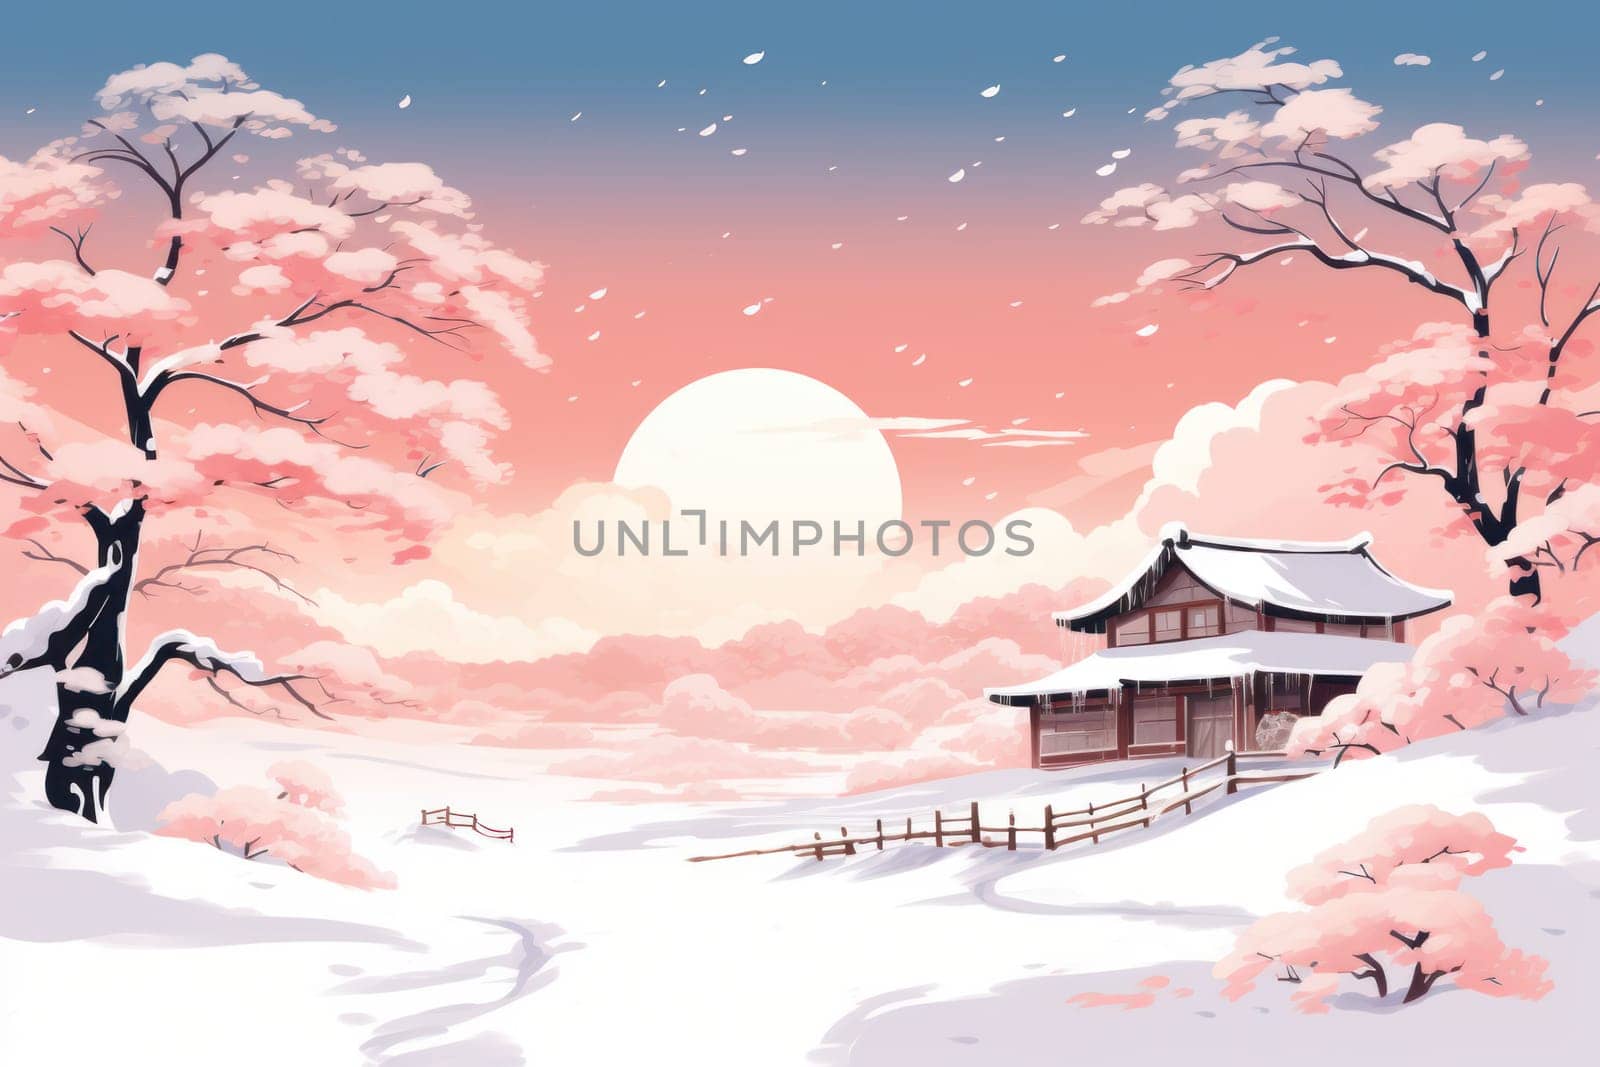 An exquisite winter composition, expertly capturing the tranquil allure of recently fallen snow draping over trees, landscapes, and architectural structures.